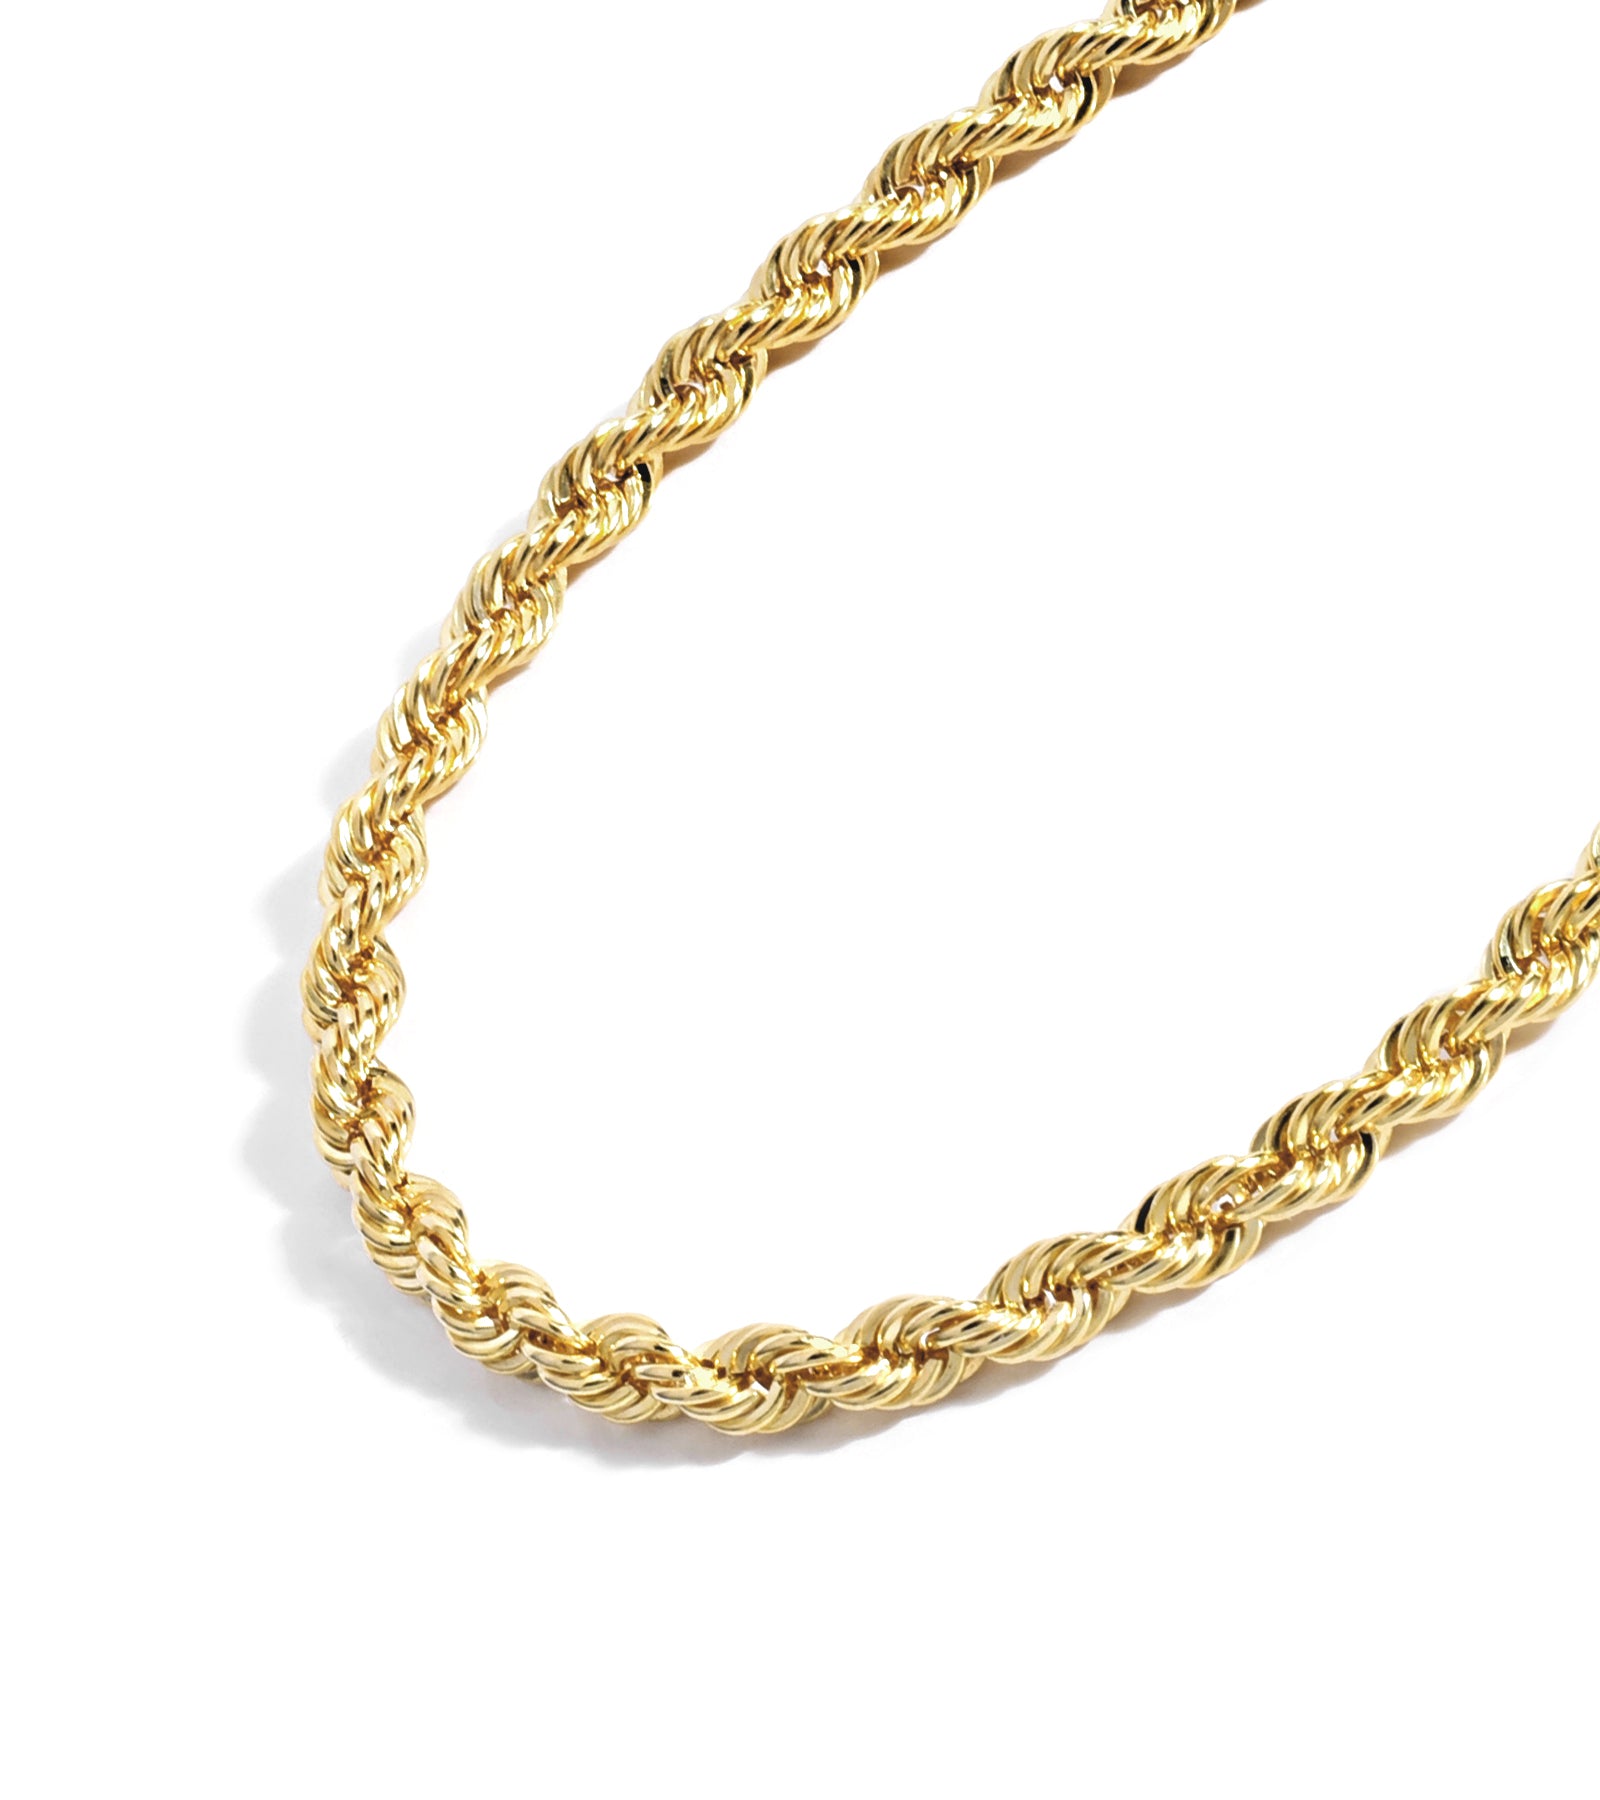 Thin gold filled rope chain necklace